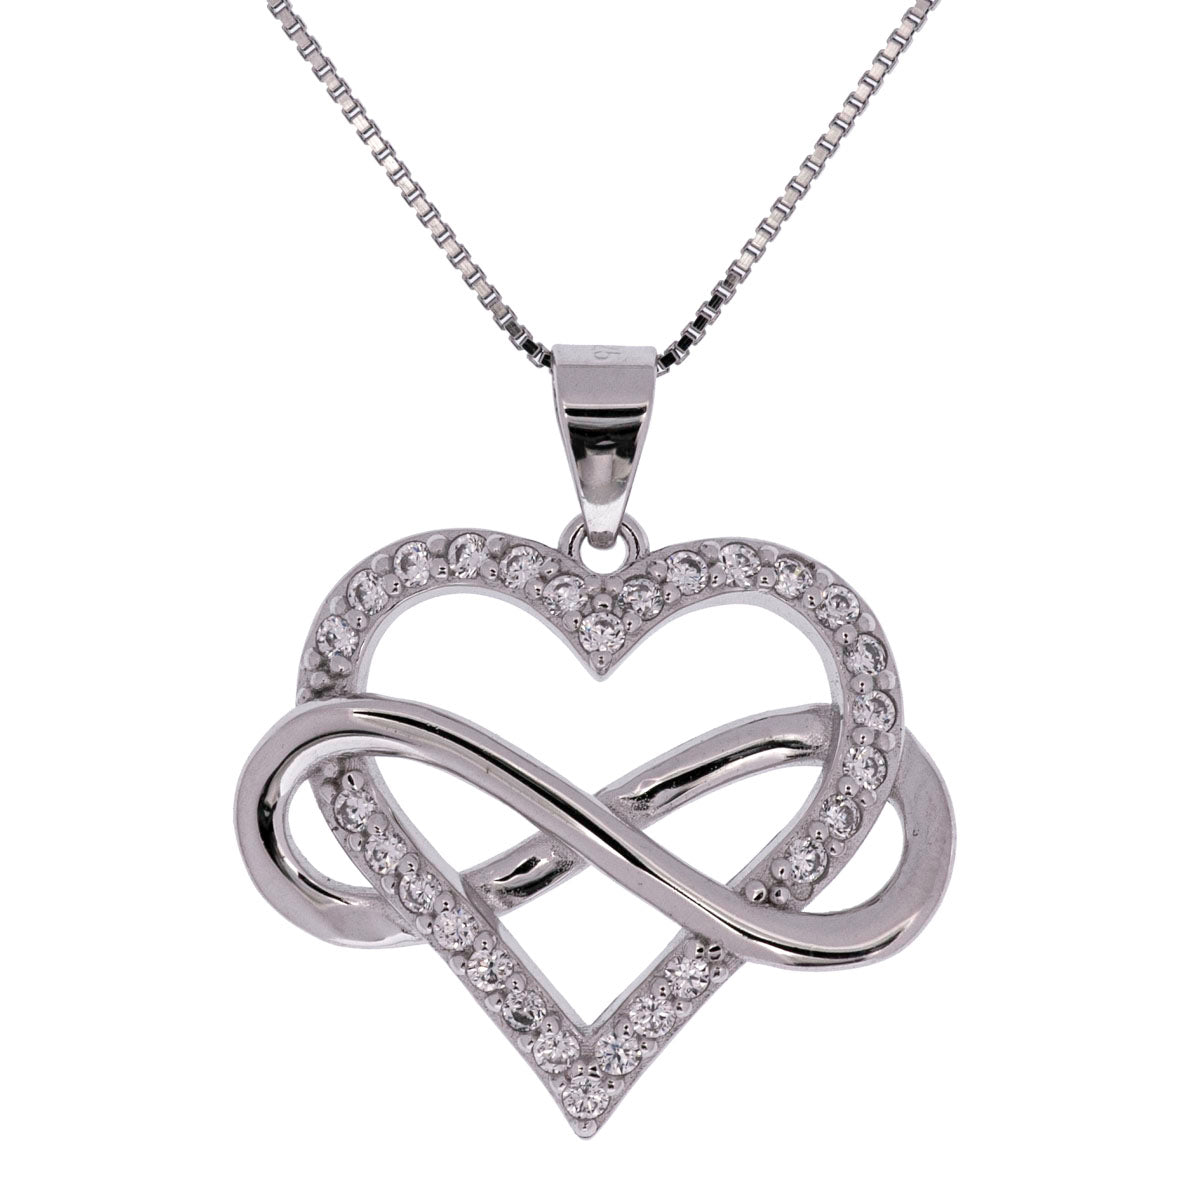 Straighten Your Crown Infinity Heart Silver Necklace - Soulmate